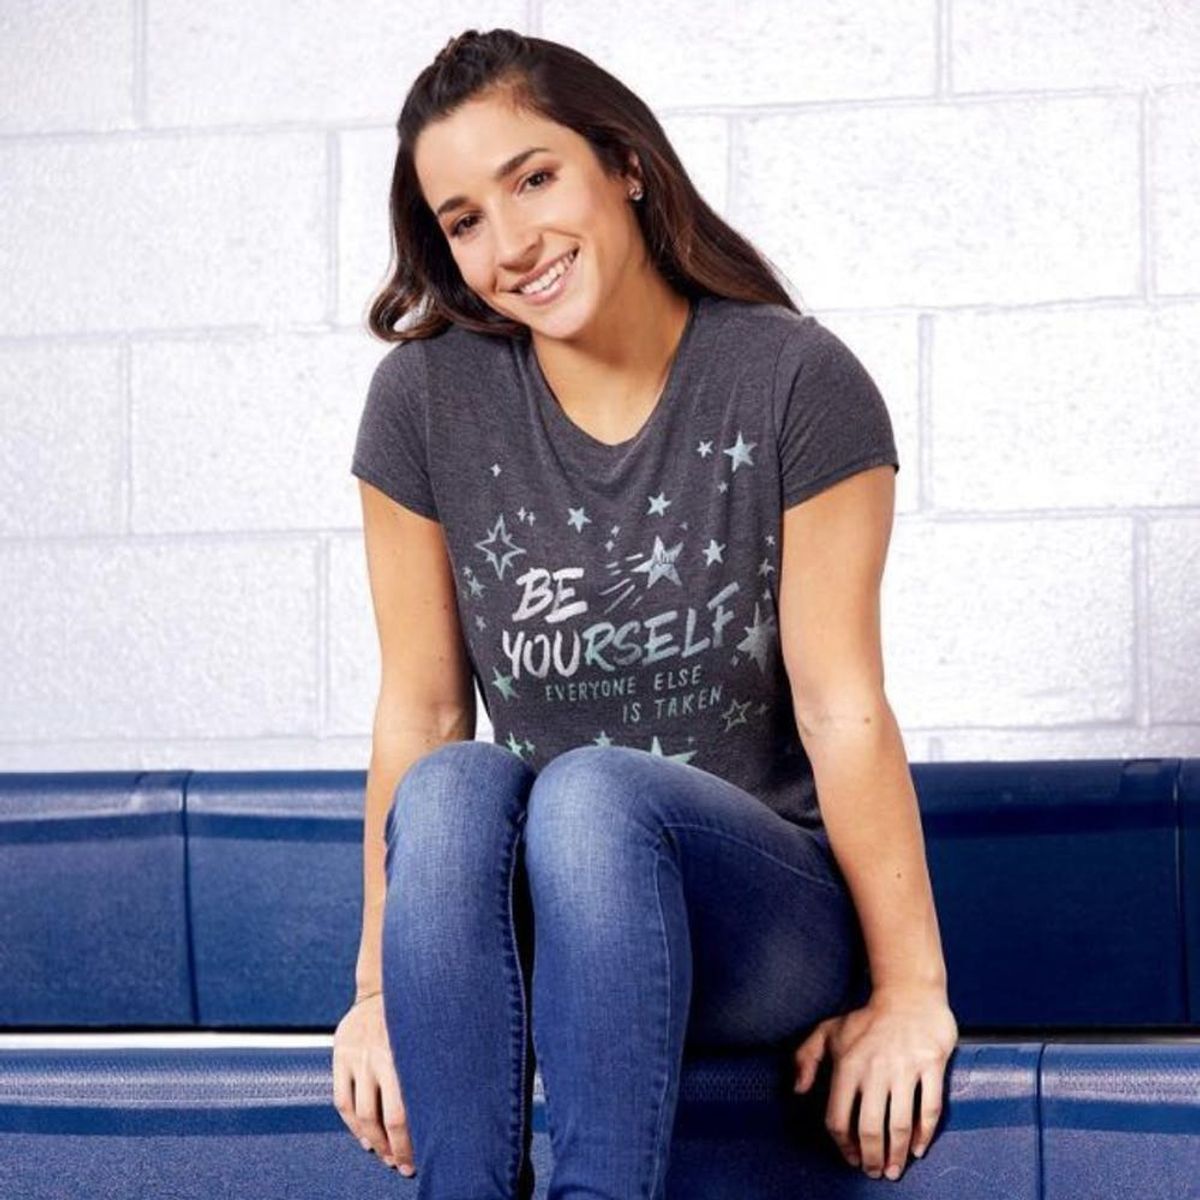 Aly Raisman Wants to Remind You That Life Is Good